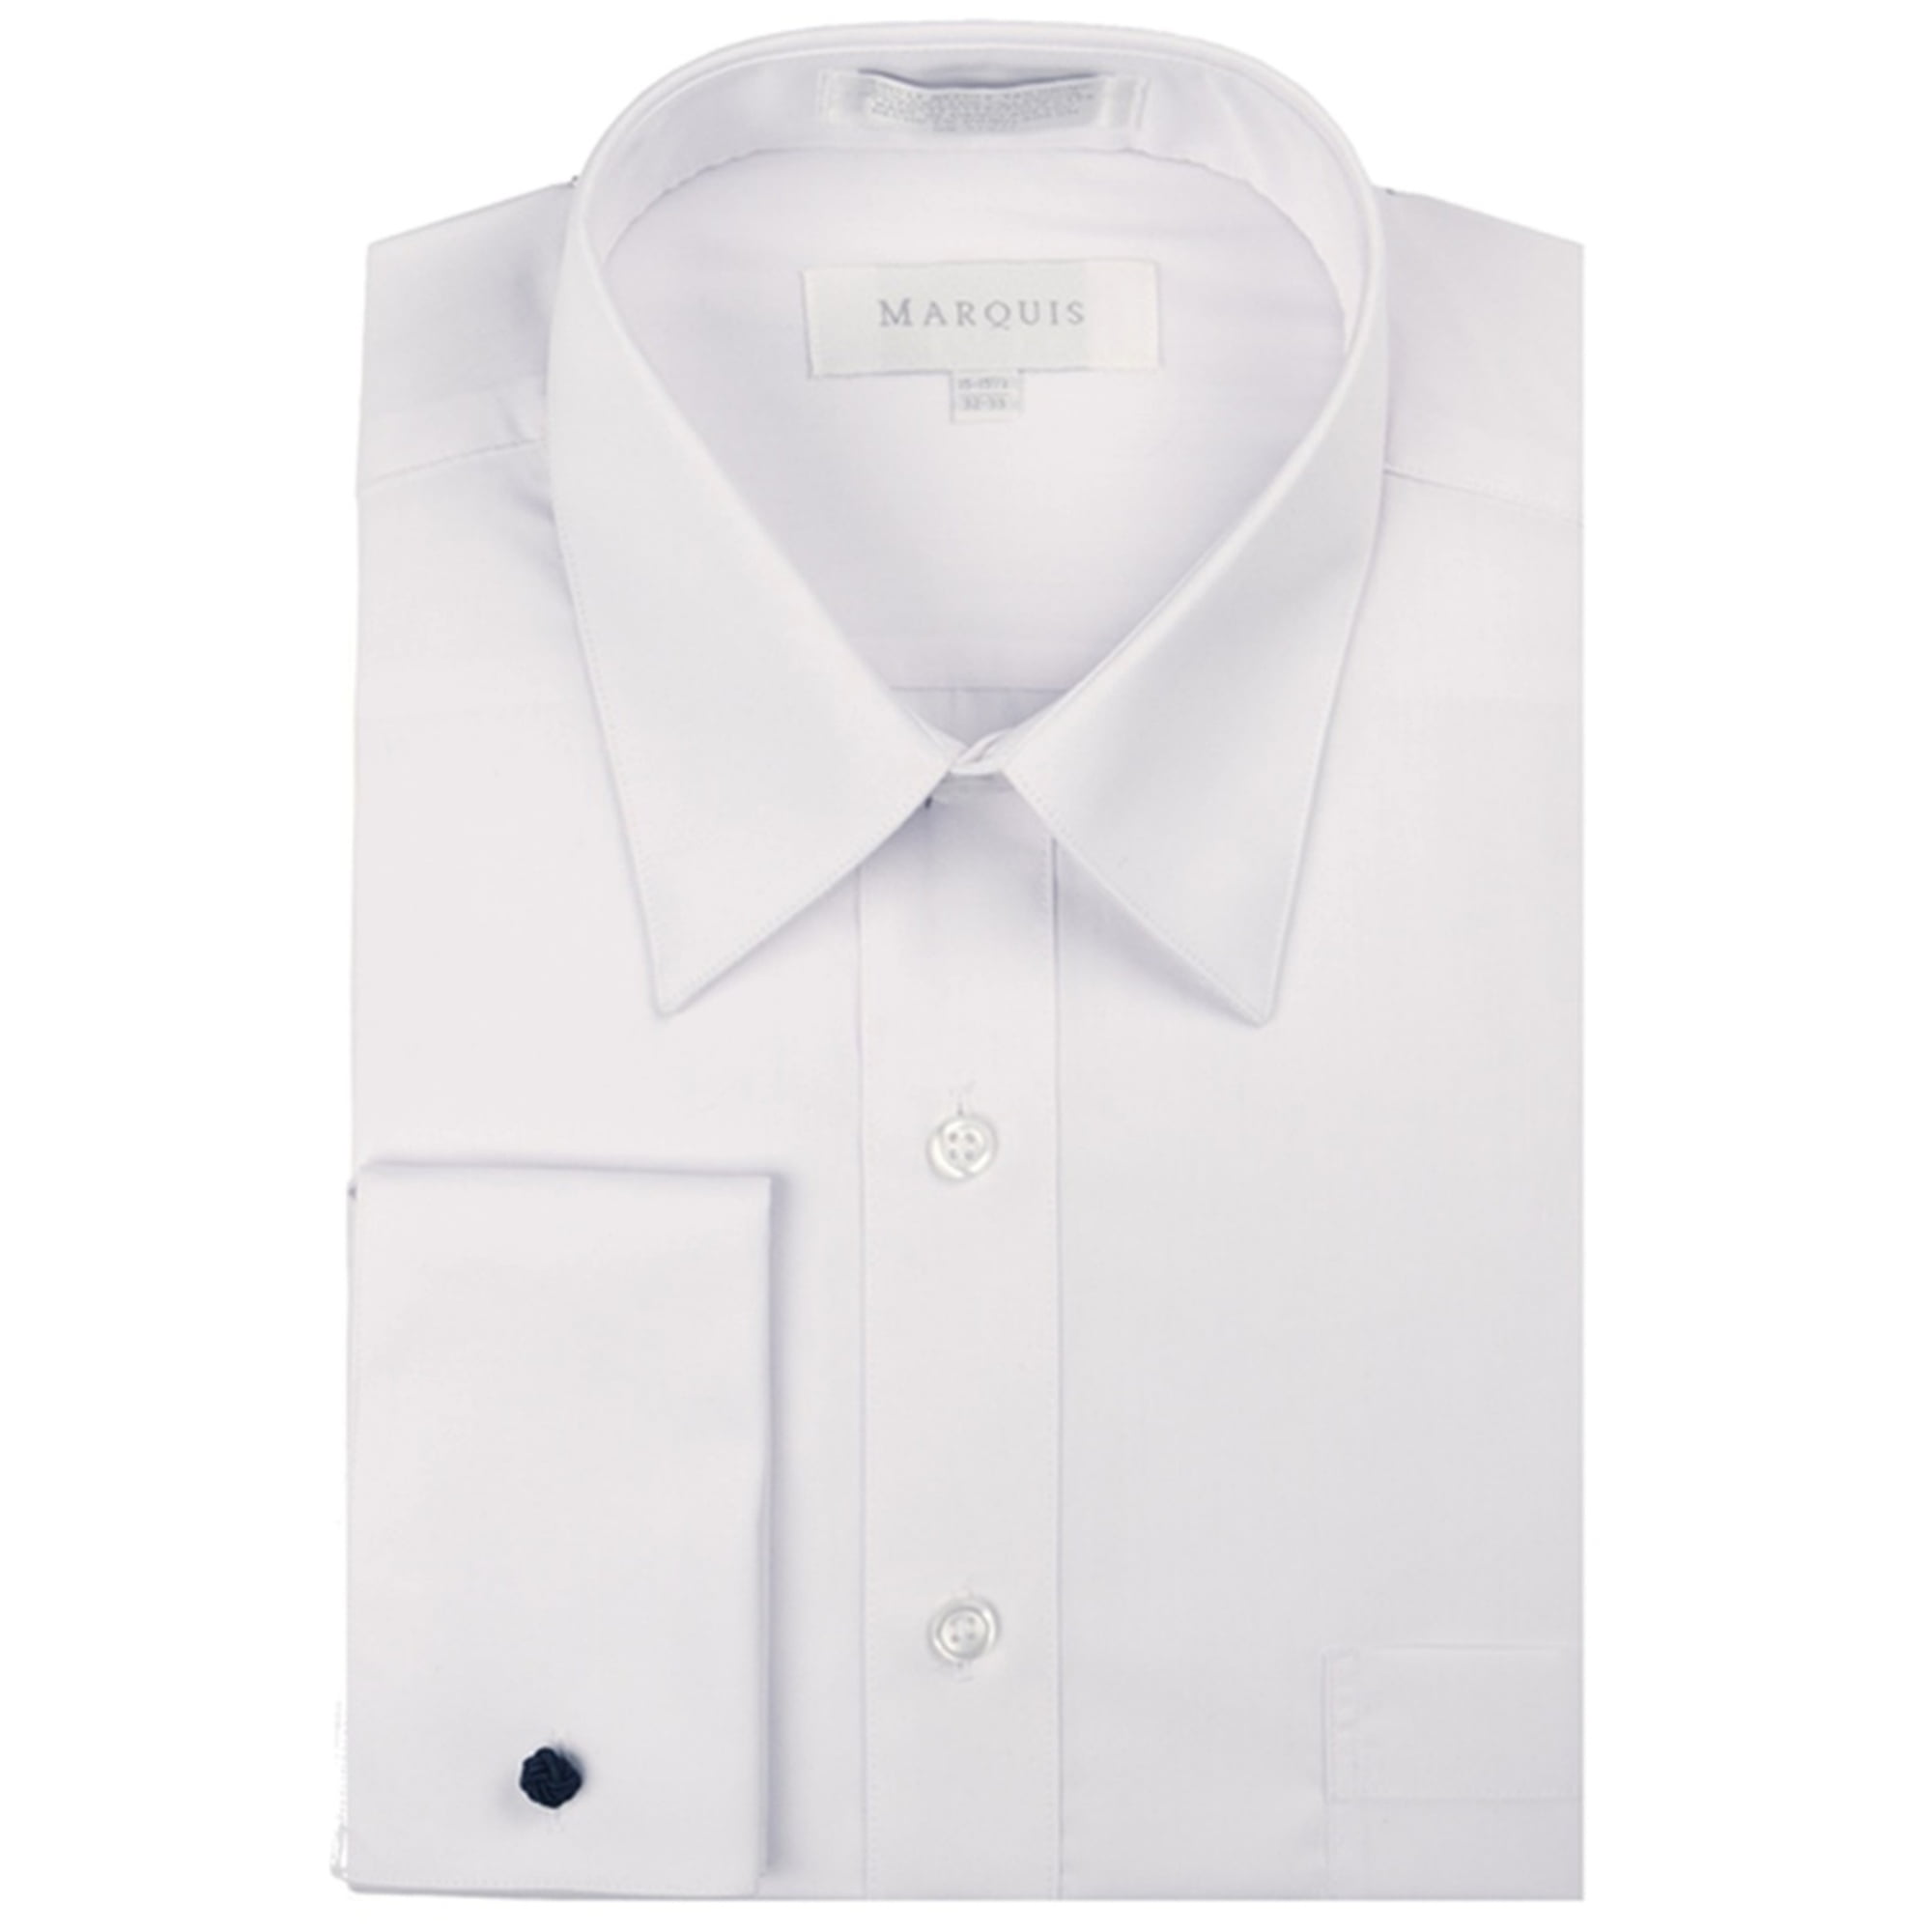 Inhibit Be confused Degree Celsius Men's Regular Fit French Cuff Dress Shirt - Cufflinks Included - Walmart.com